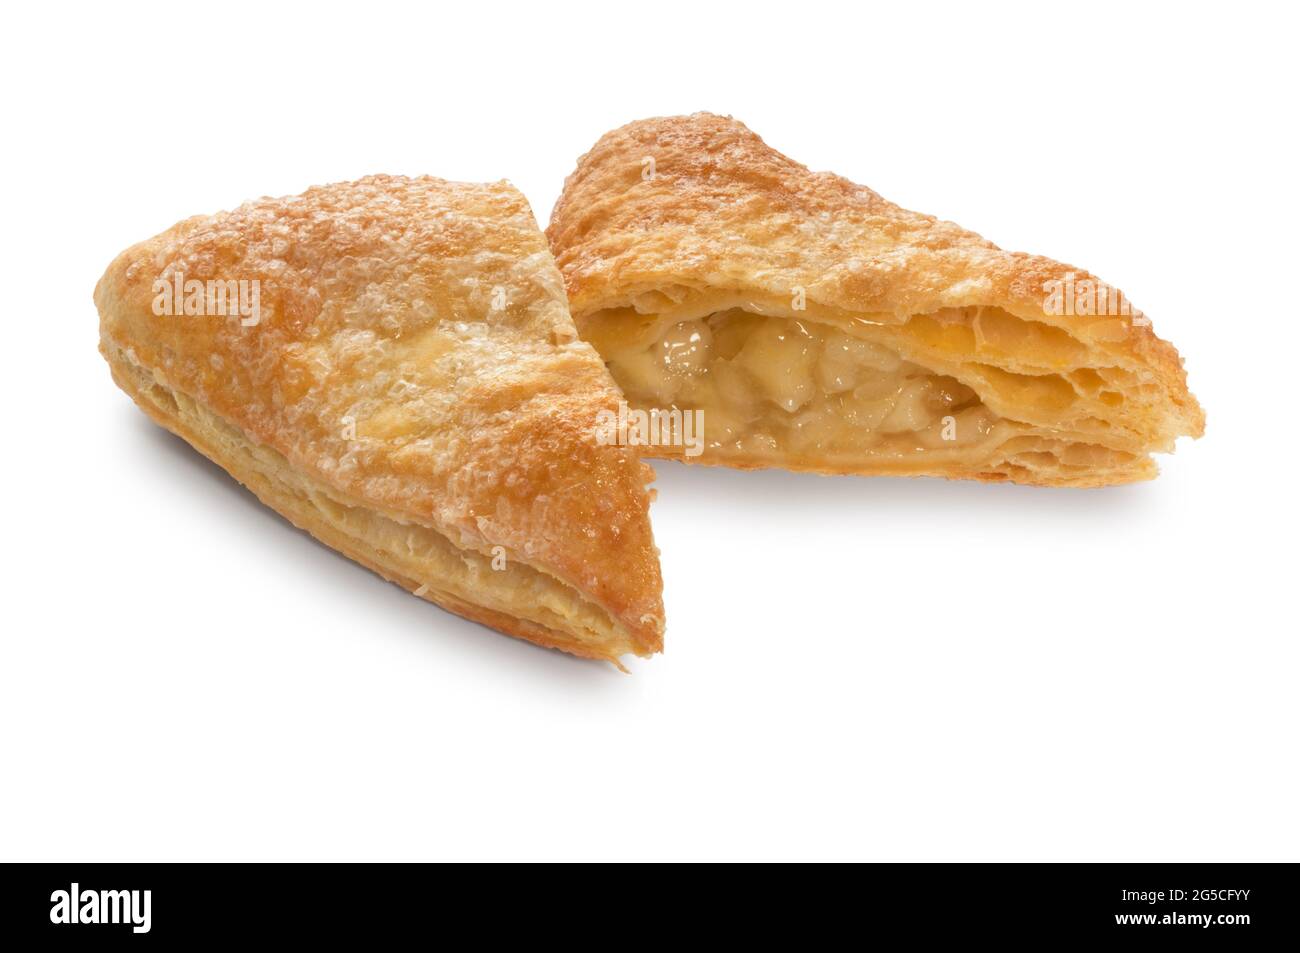 Studio shot of apple turnover cake cut out against a white background - John Gollop Stock Photo